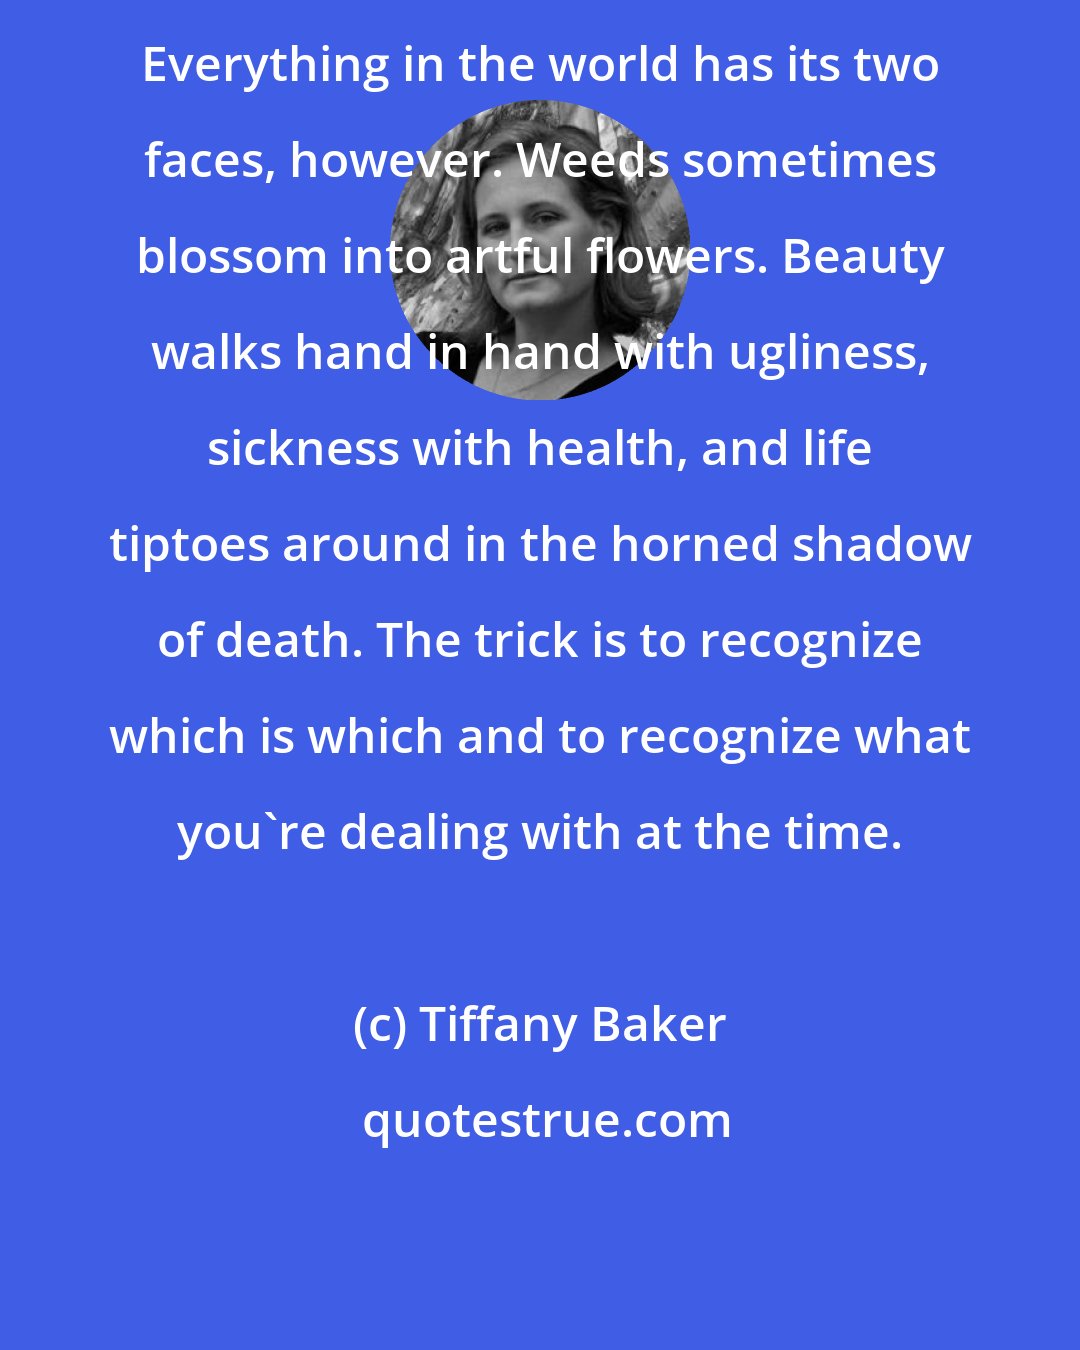 Tiffany Baker: Everything in the world has its two faces, however. Weeds sometimes blossom into artful flowers. Beauty walks hand in hand with ugliness, sickness with health, and life tiptoes around in the horned shadow of death. The trick is to recognize which is which and to recognize what you're dealing with at the time.